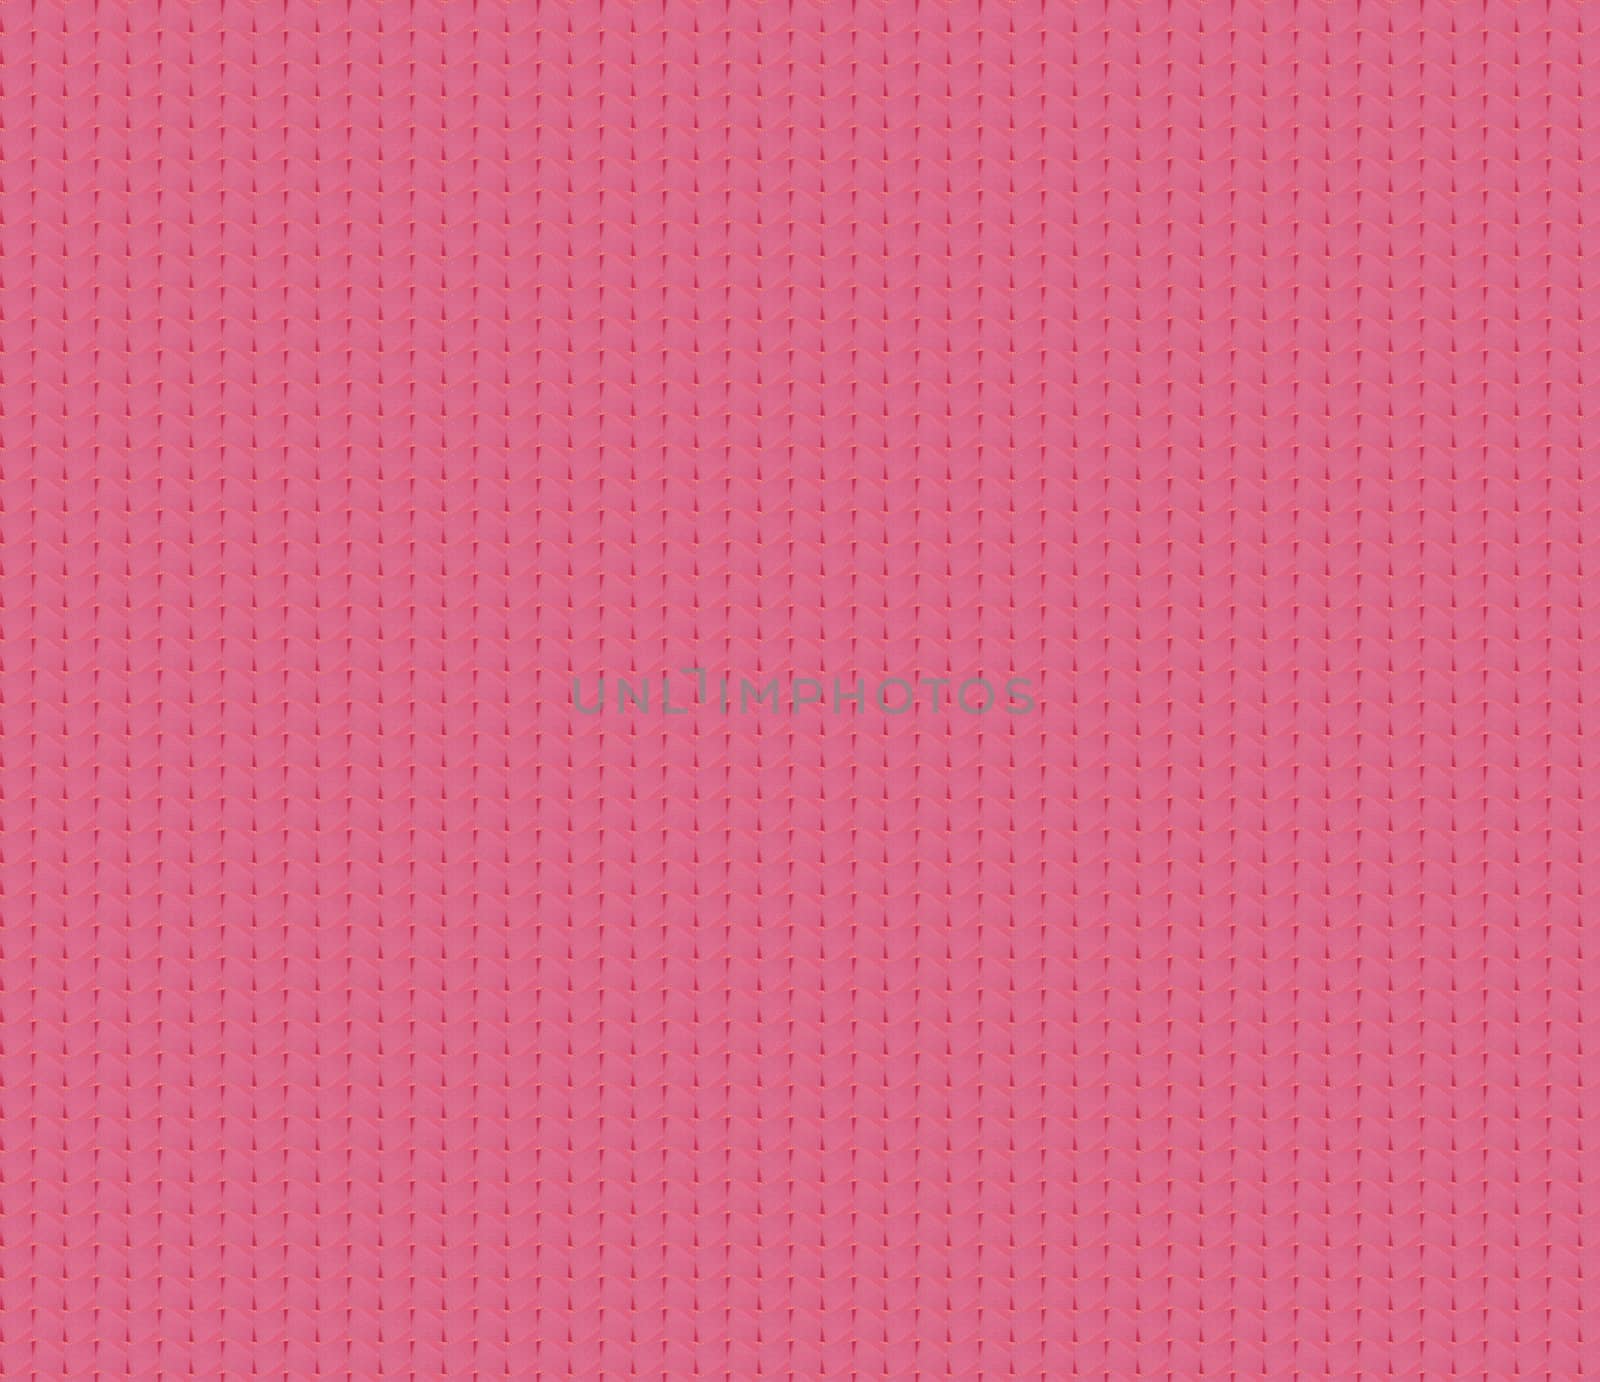 
Abstract tile background of pink hues with a small figure, located in vertical rows